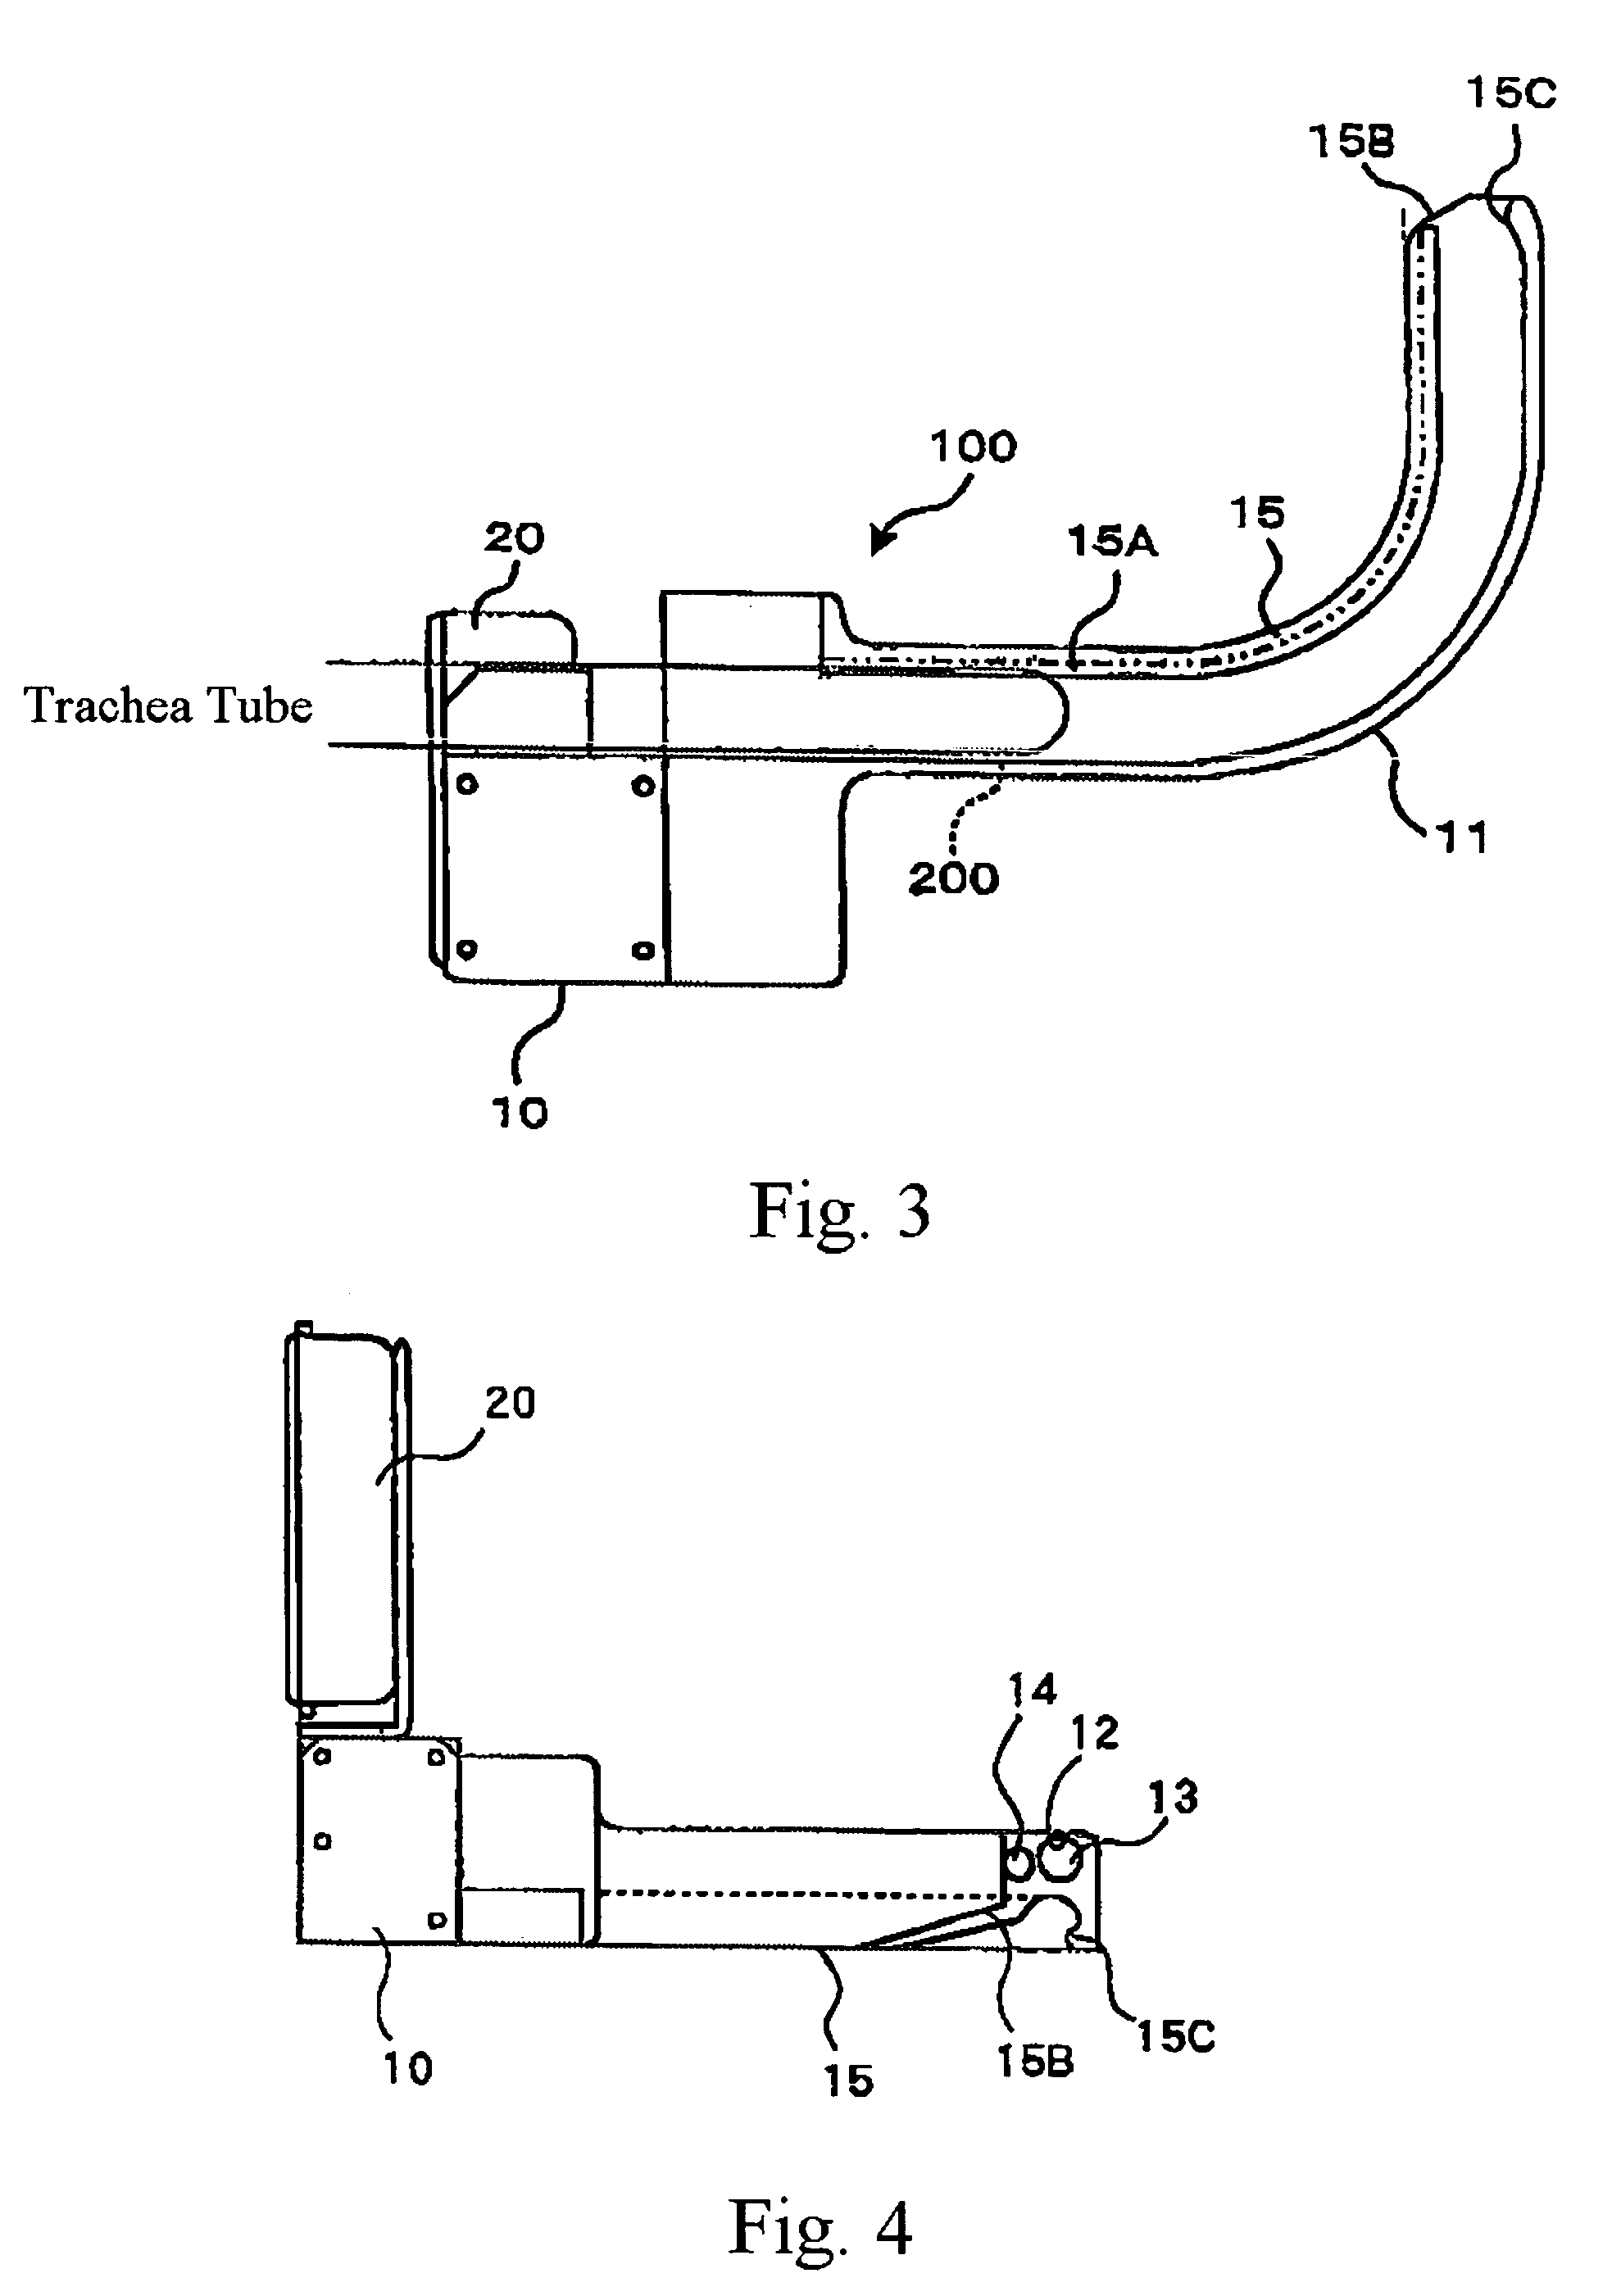 Oral airway and airway management assistive device provided with the oral airway